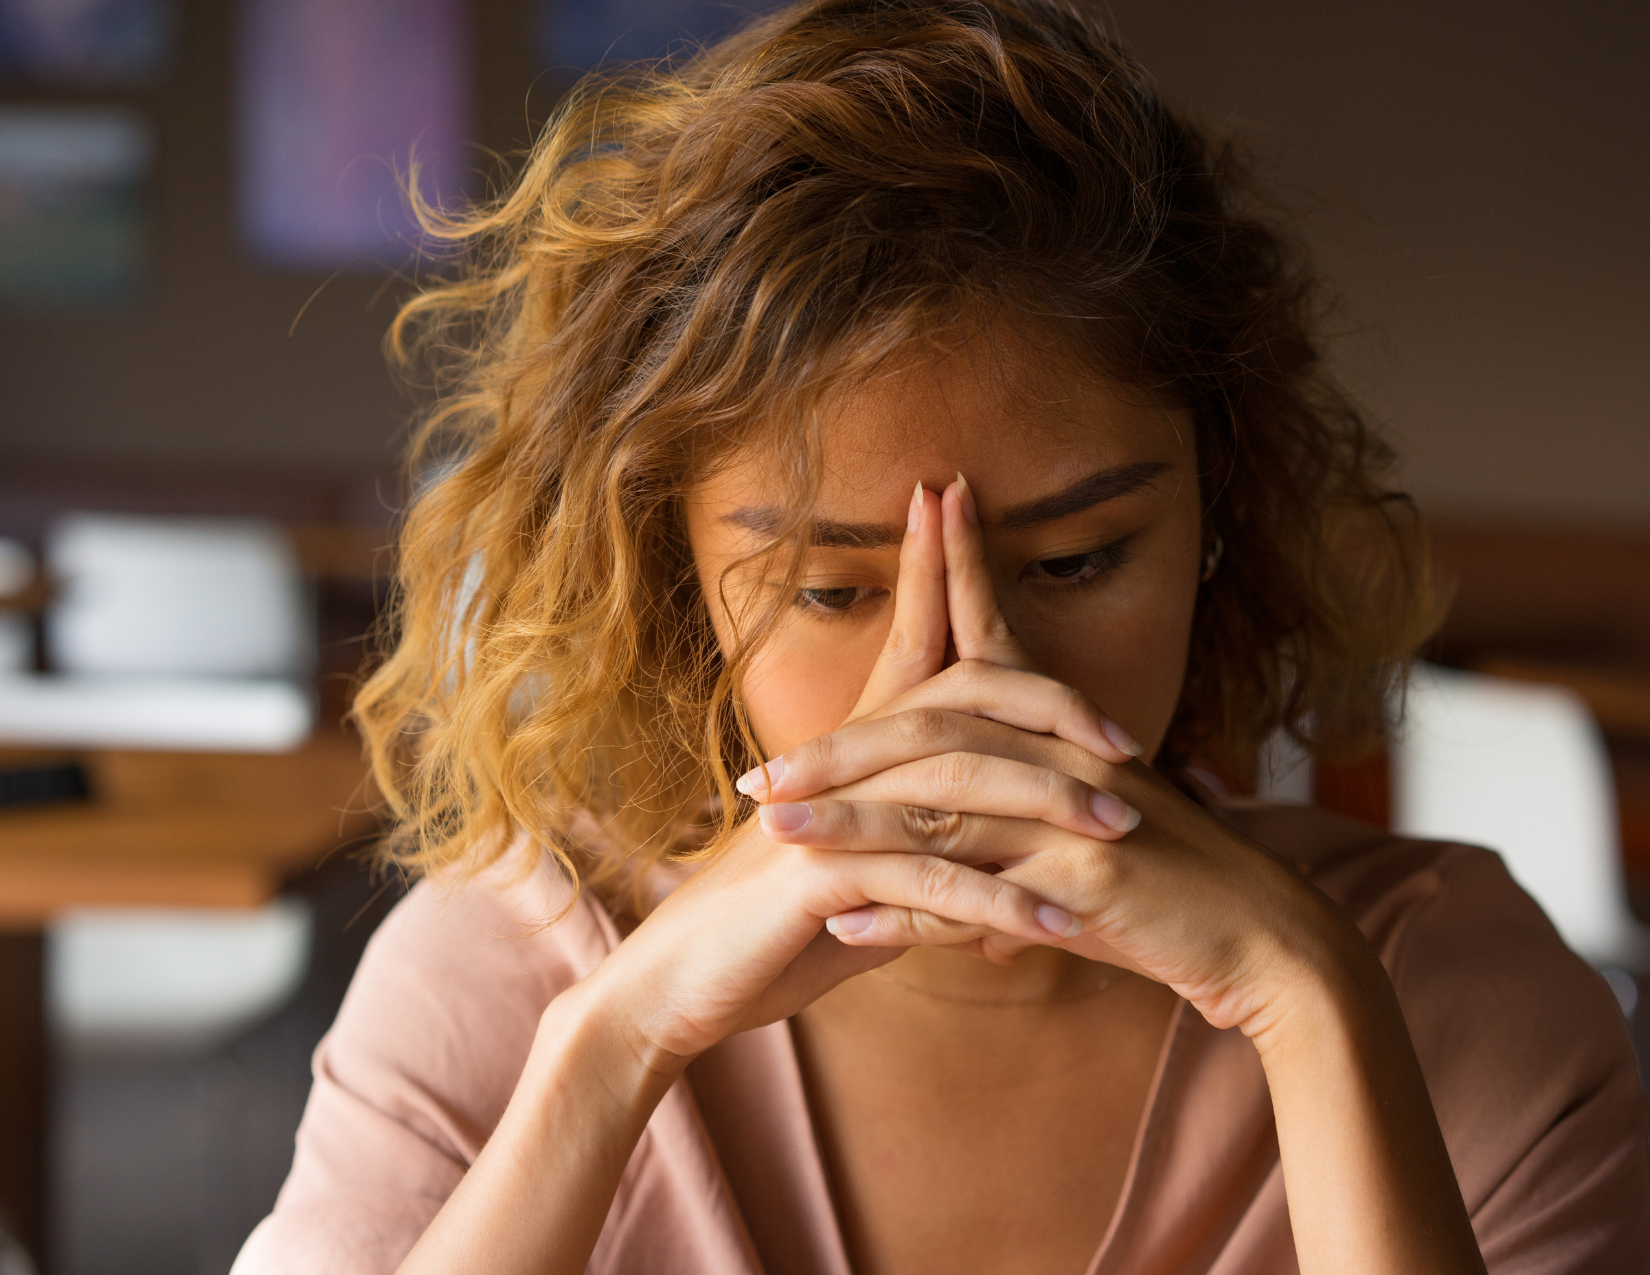 5 Diseases That Commonly Coexist With Migraine